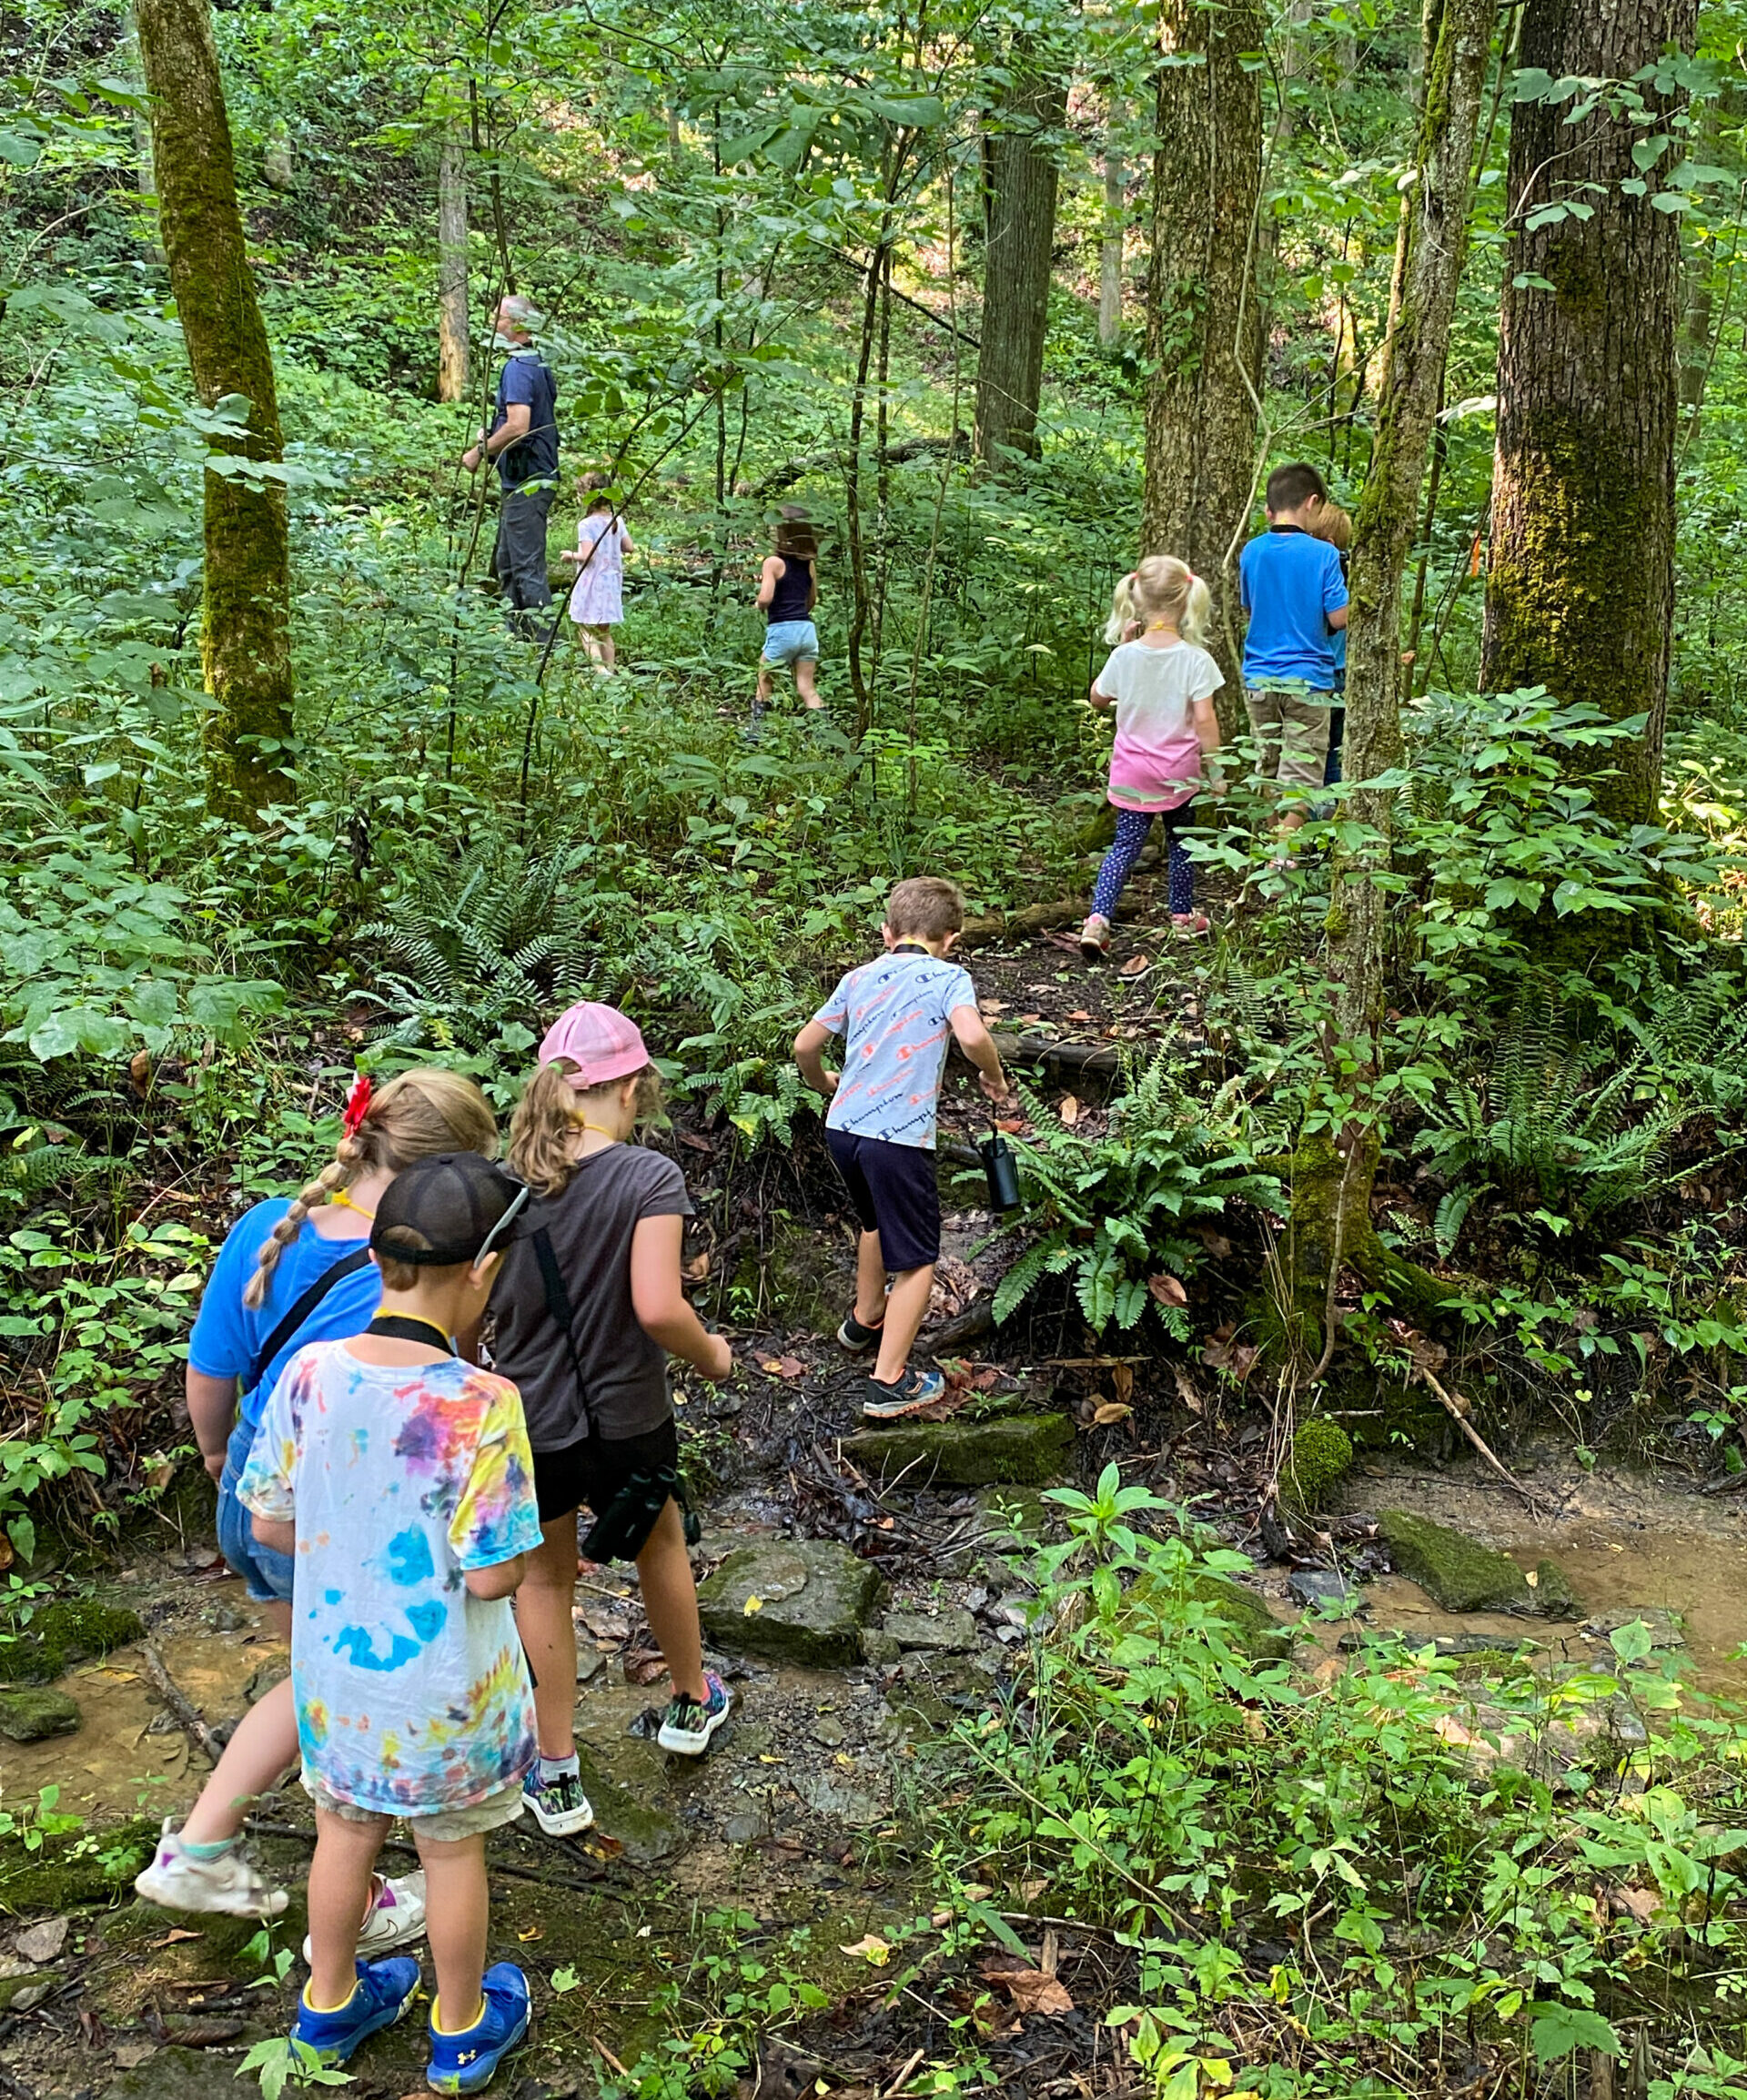 Greenacres field trip group hiking through the woods at Lewis Township